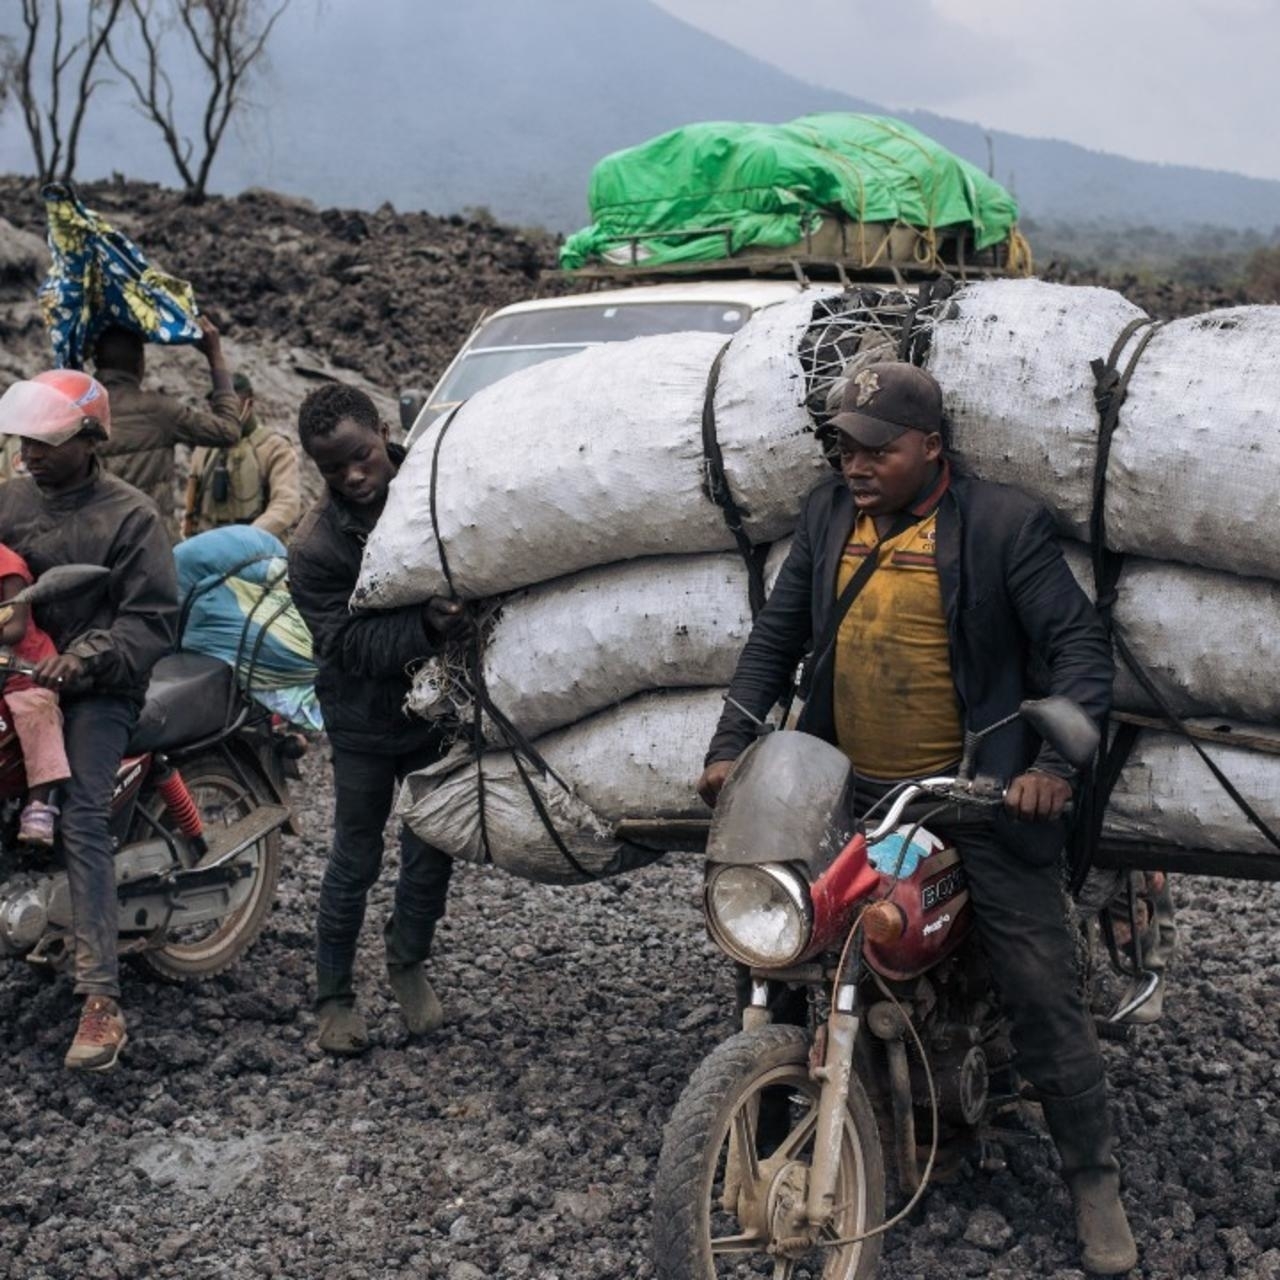 Nearly 400,000 flee DR Congo city over fears volcano could erupt again